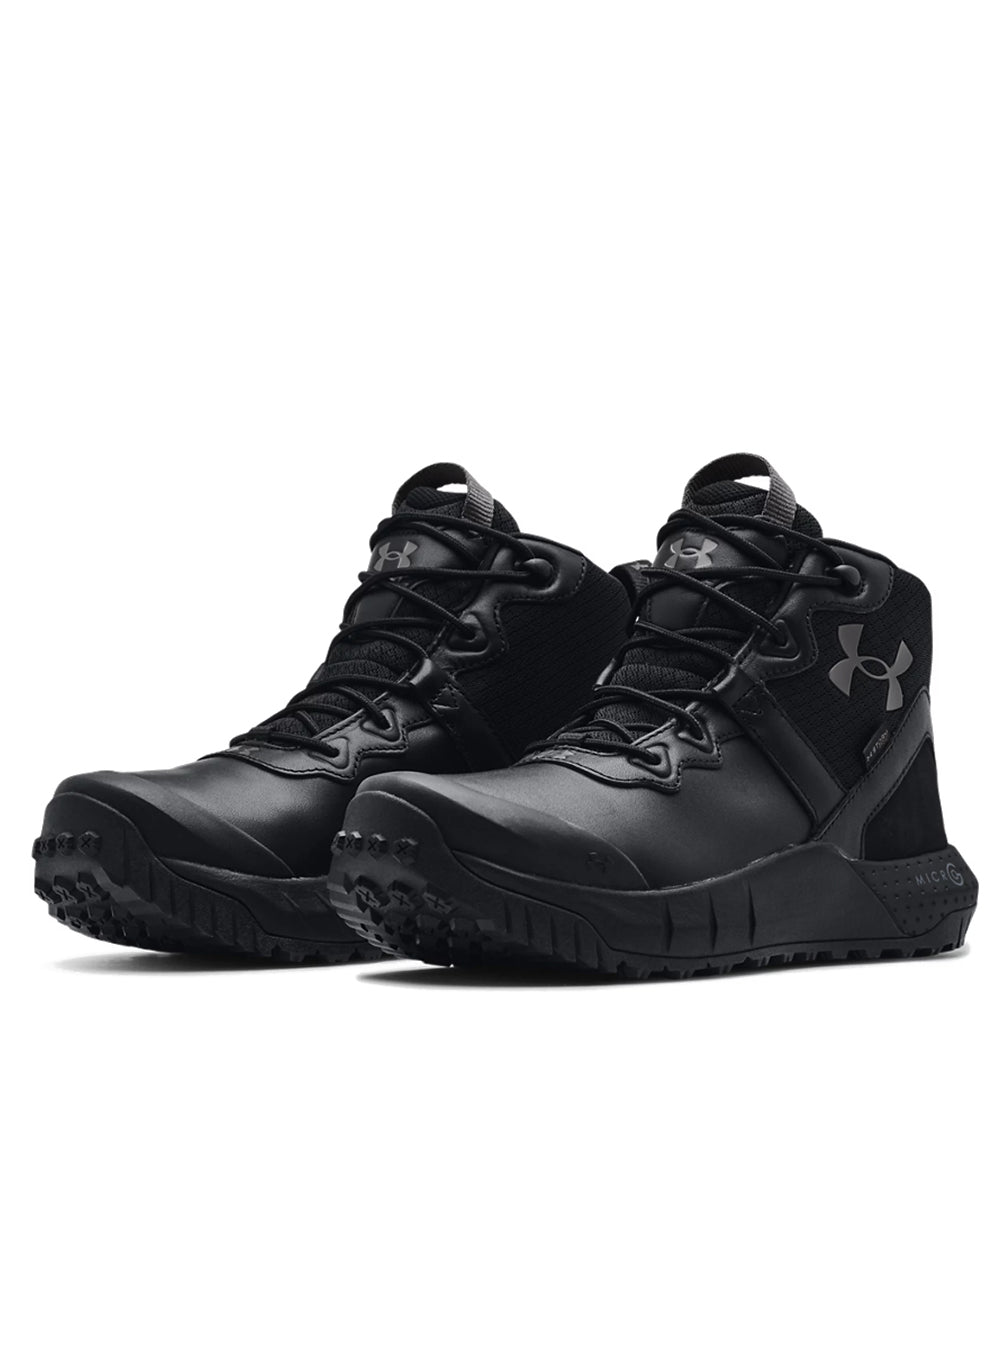 Under Armour Micro G Valsetz Mid Leather Waterproof Boots - TacSource